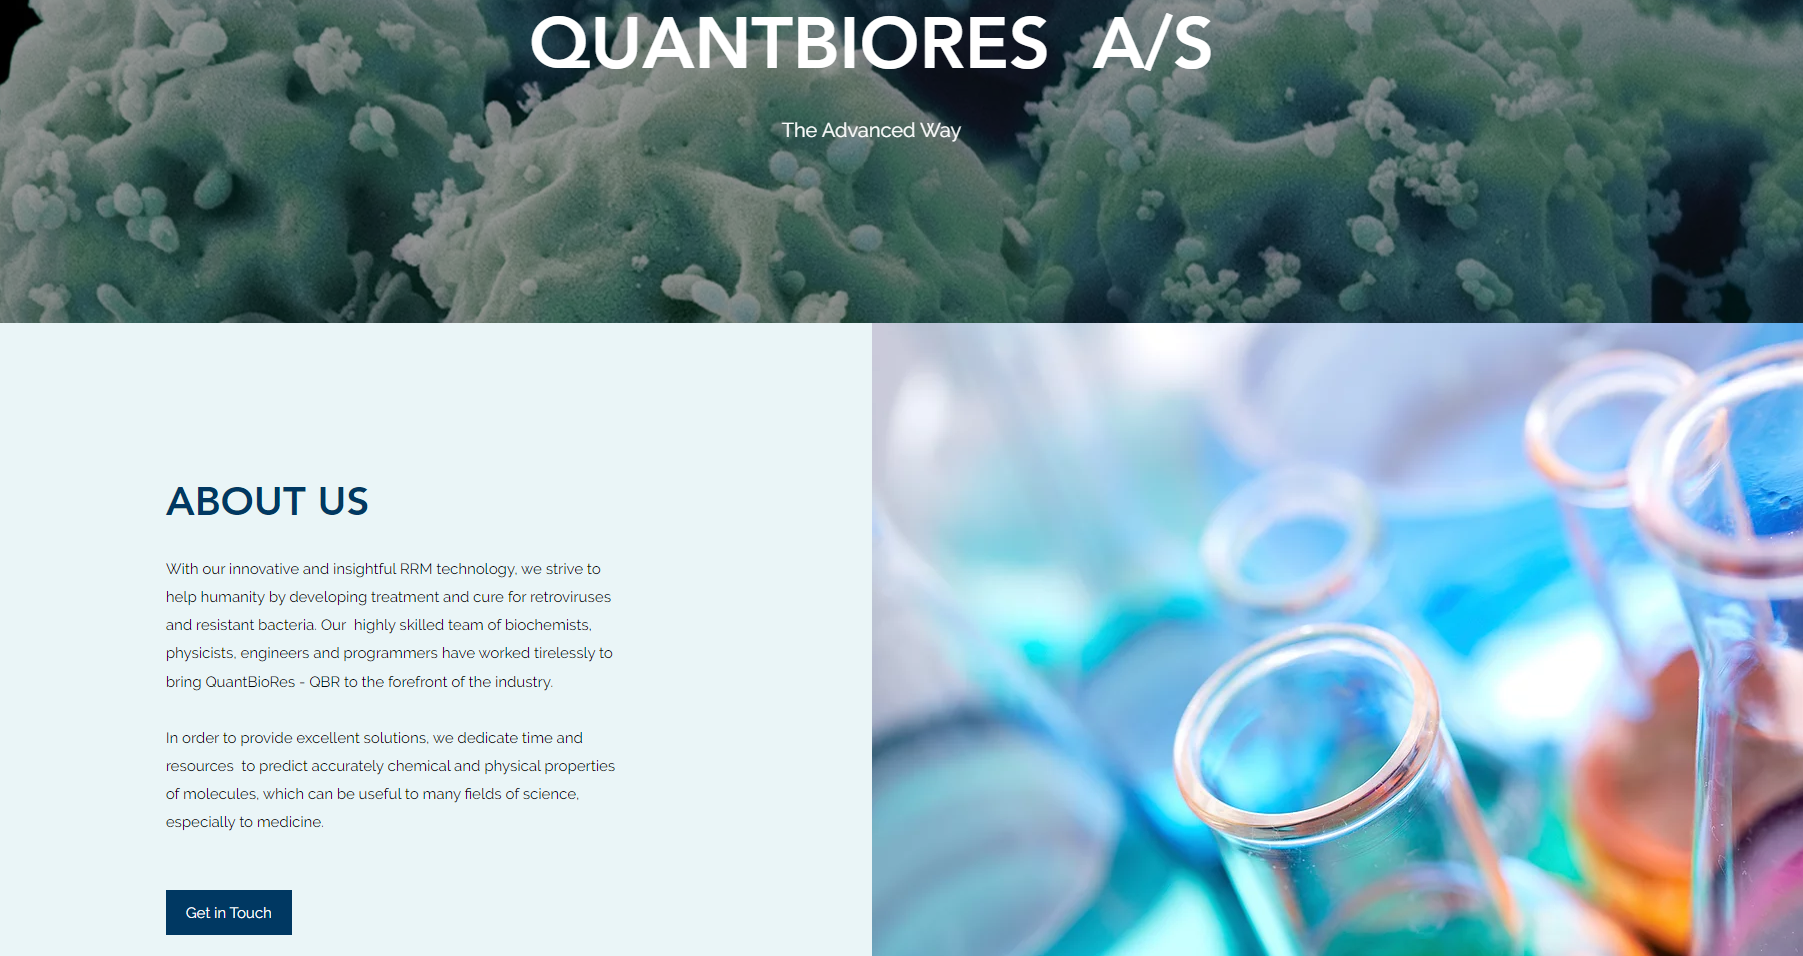 Novak Djokovic and his wife Jelena have invested in Danish biotech firm QuantBioRes that is seeking to develop a treatment for COVID-19 ©QuantBioRes